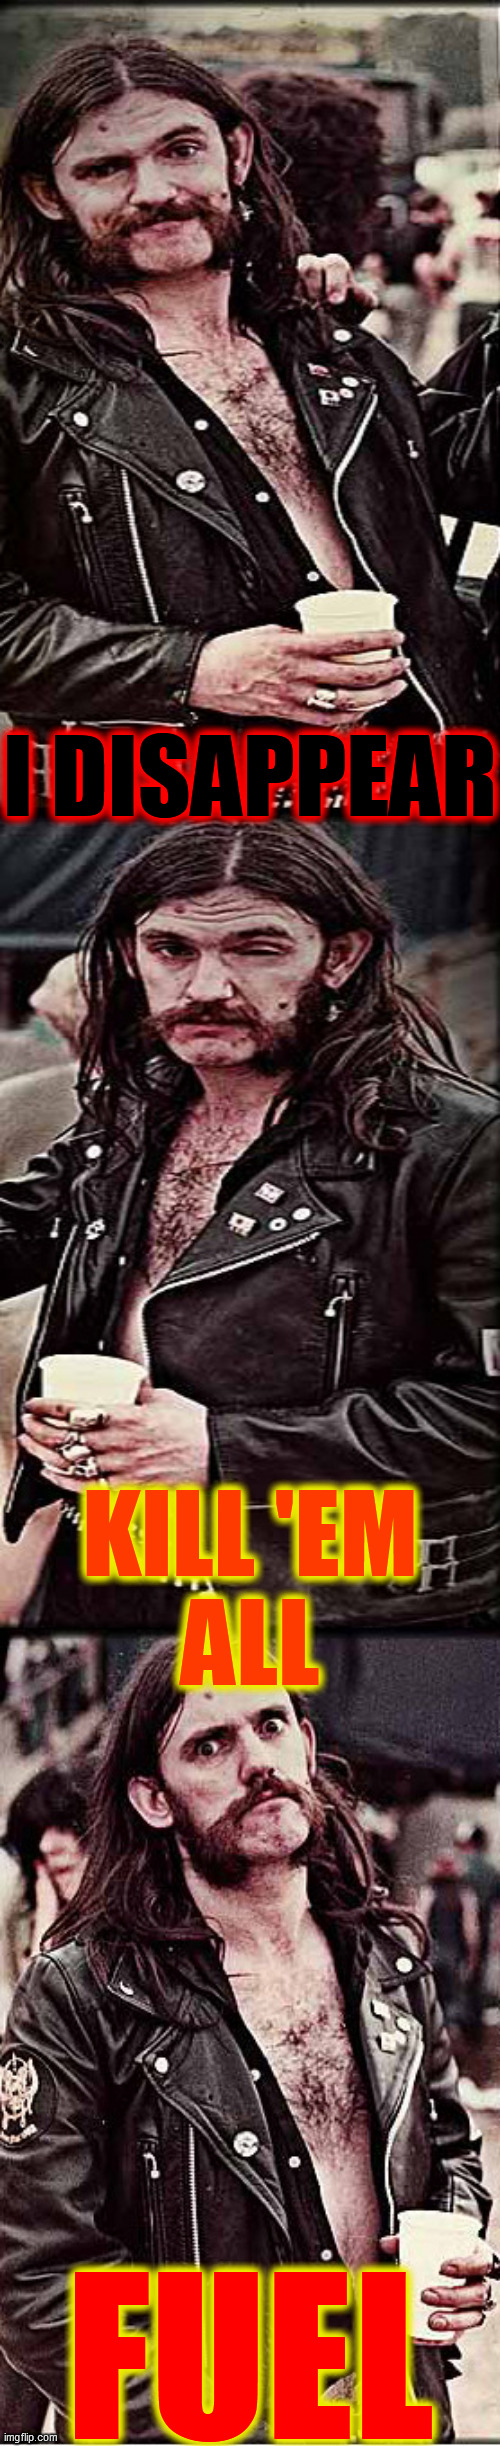 progessively pissed lemmy | I DISAPPEAR FUEL KILL 'EM
ALL | image tagged in progessively pissed lemmy | made w/ Imgflip meme maker